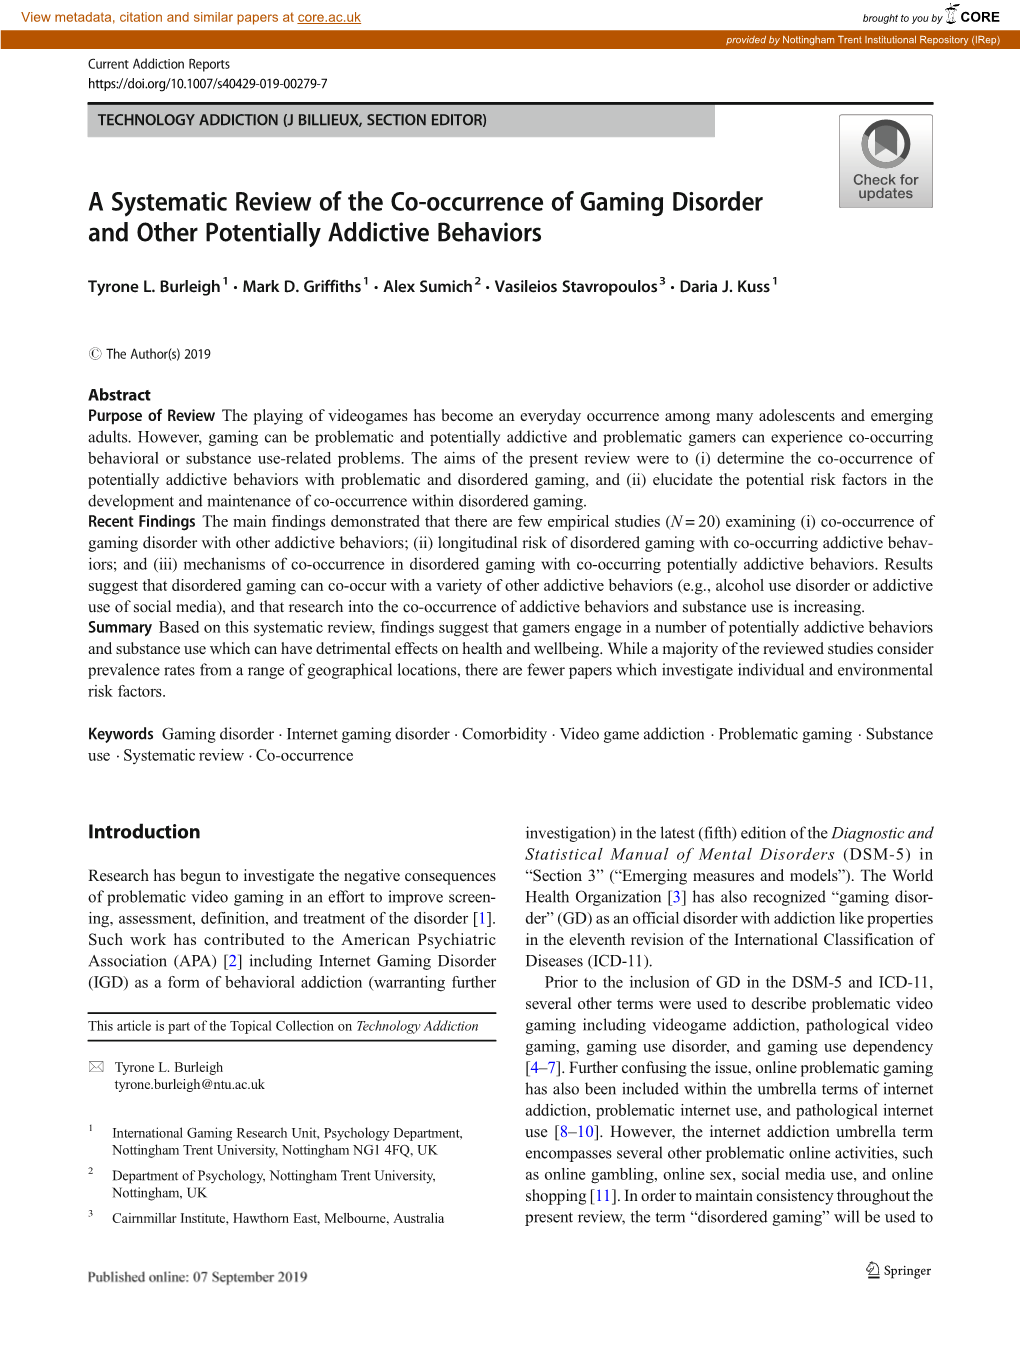 A Systematic Review of the Co-Occurrence of Gaming Disorder and Other Potentially Addictive Behaviors